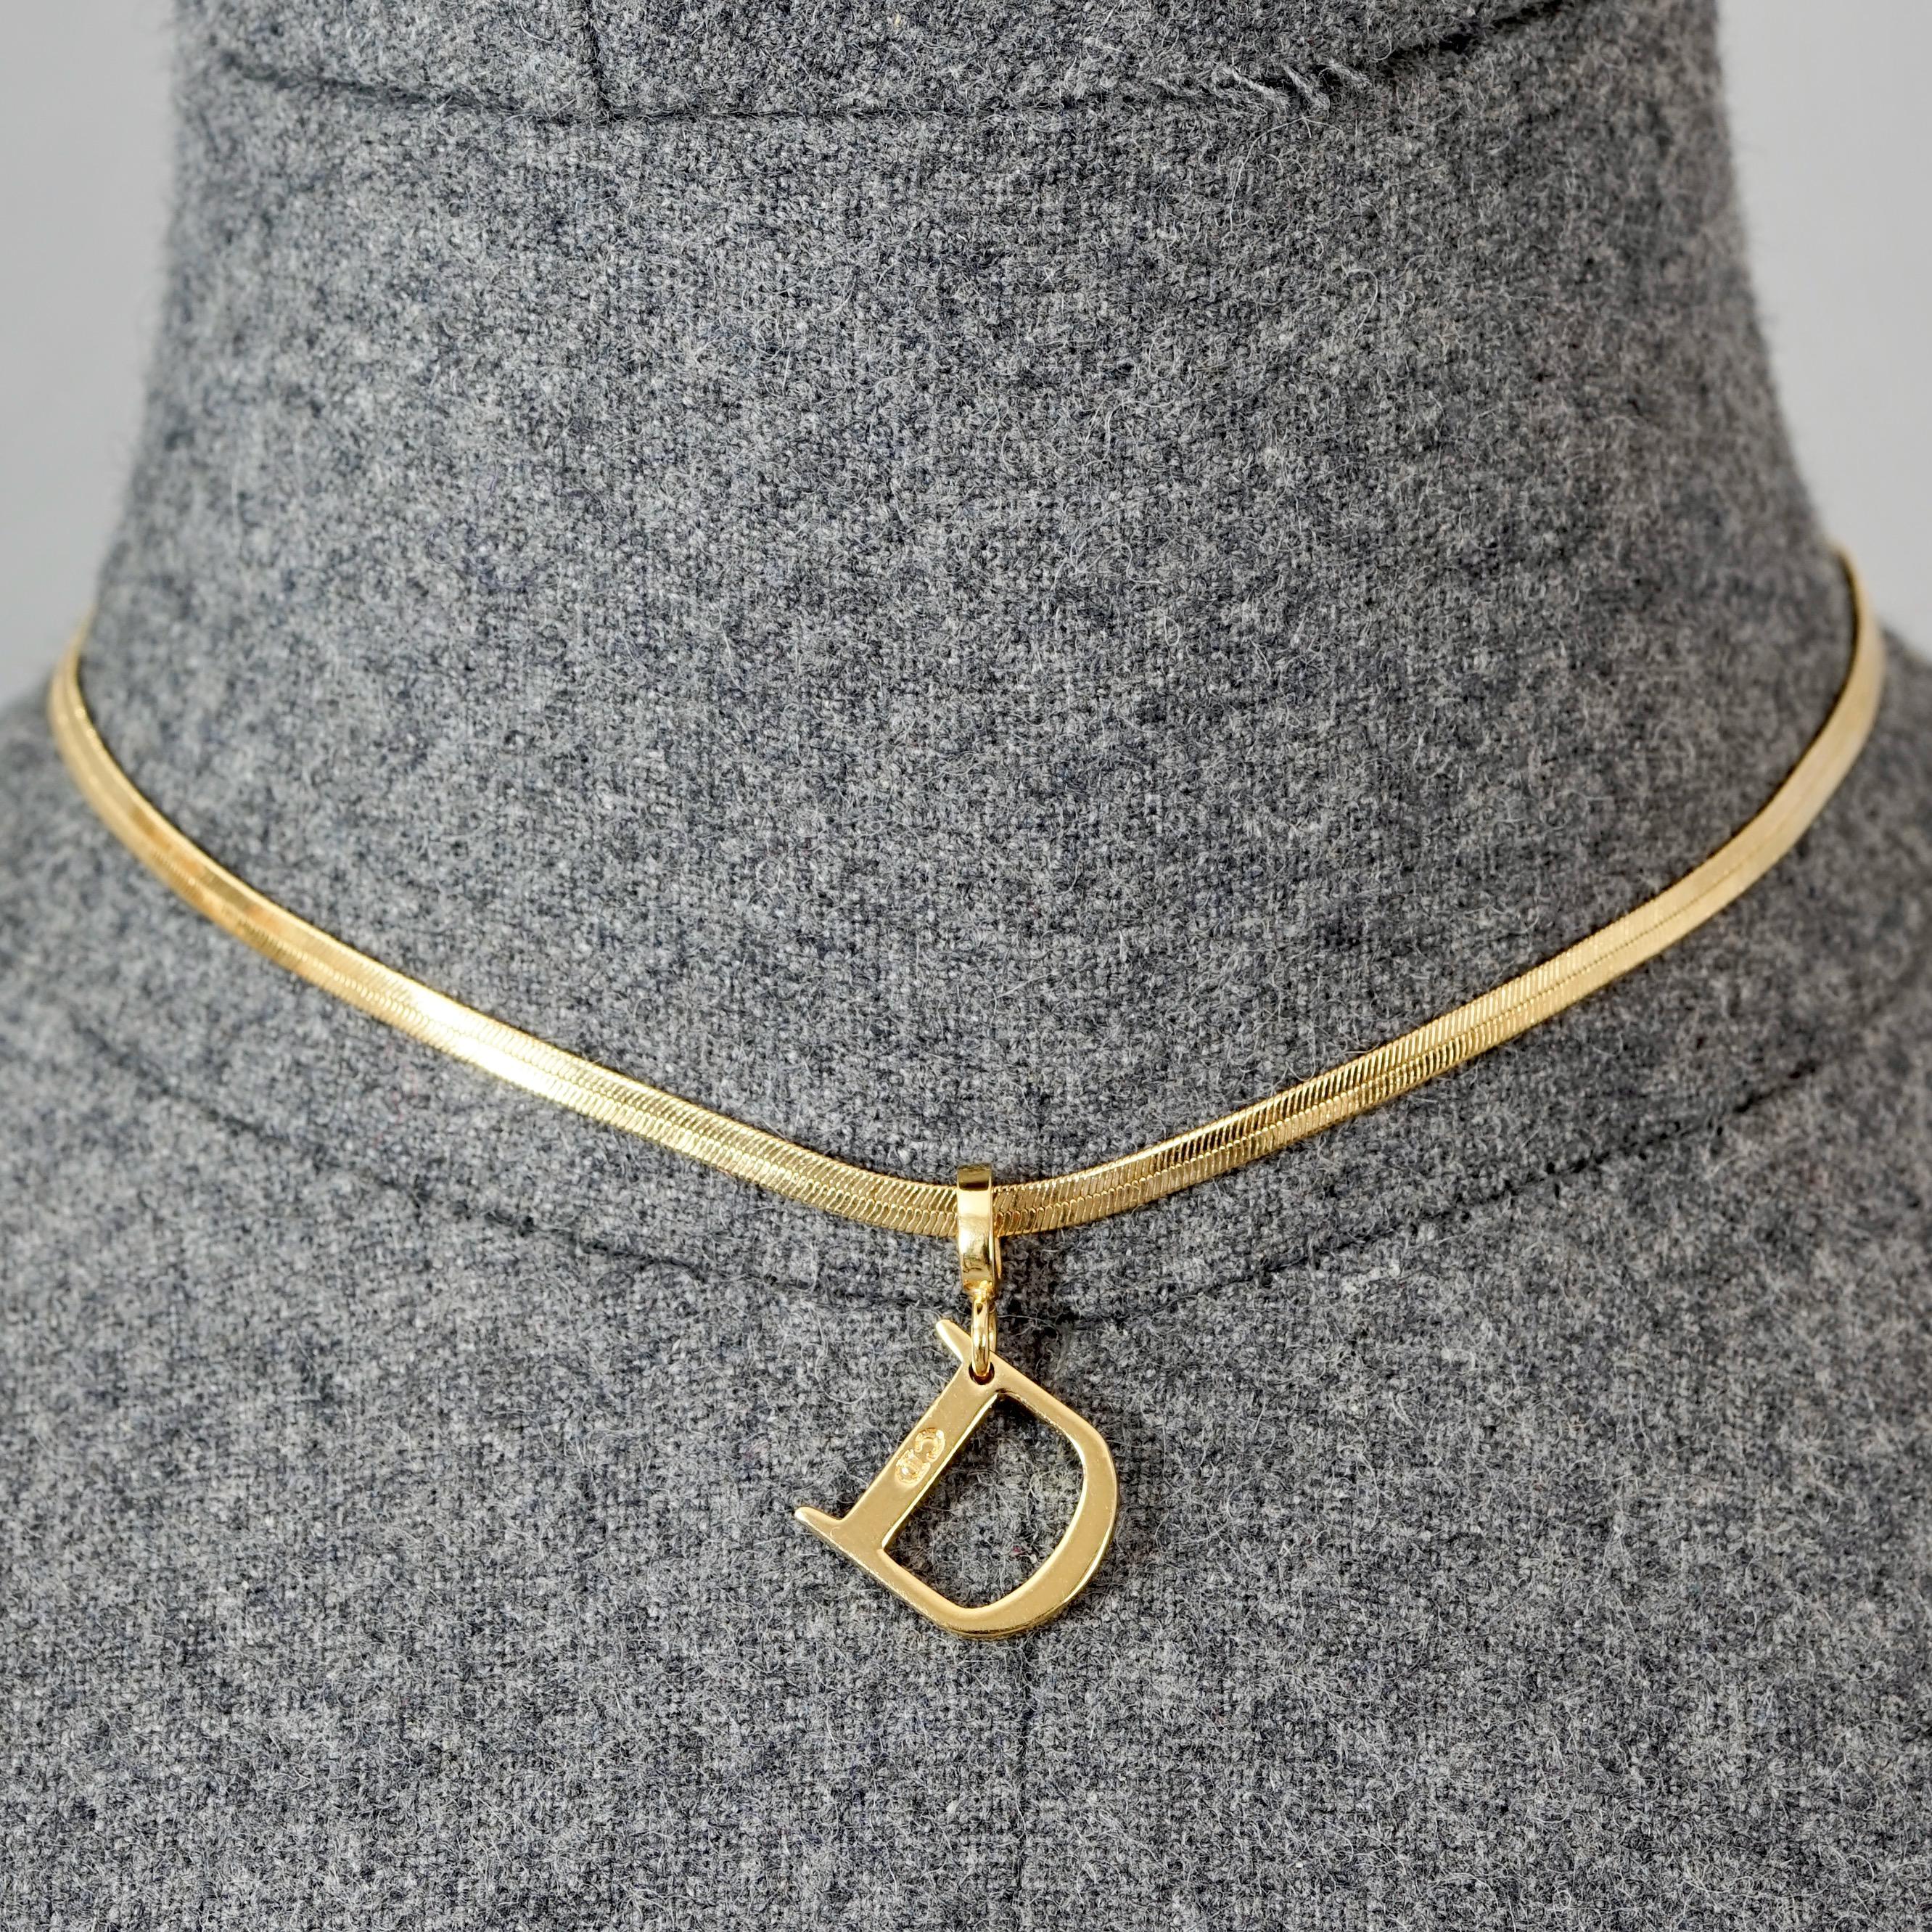 Vintage CHRISTIAN DIOR D Logo Pendant Snake Chain Necklace

Measurements:
Height: 1.02 inches (2.6 cm)
Wearable Length: 10.43 inches to 12.59 inches (26.5 cm to 32 cm)

Features:
- 100% Authentic CHRISTIAN DIOR.
- Snake chain necklace with D pendant